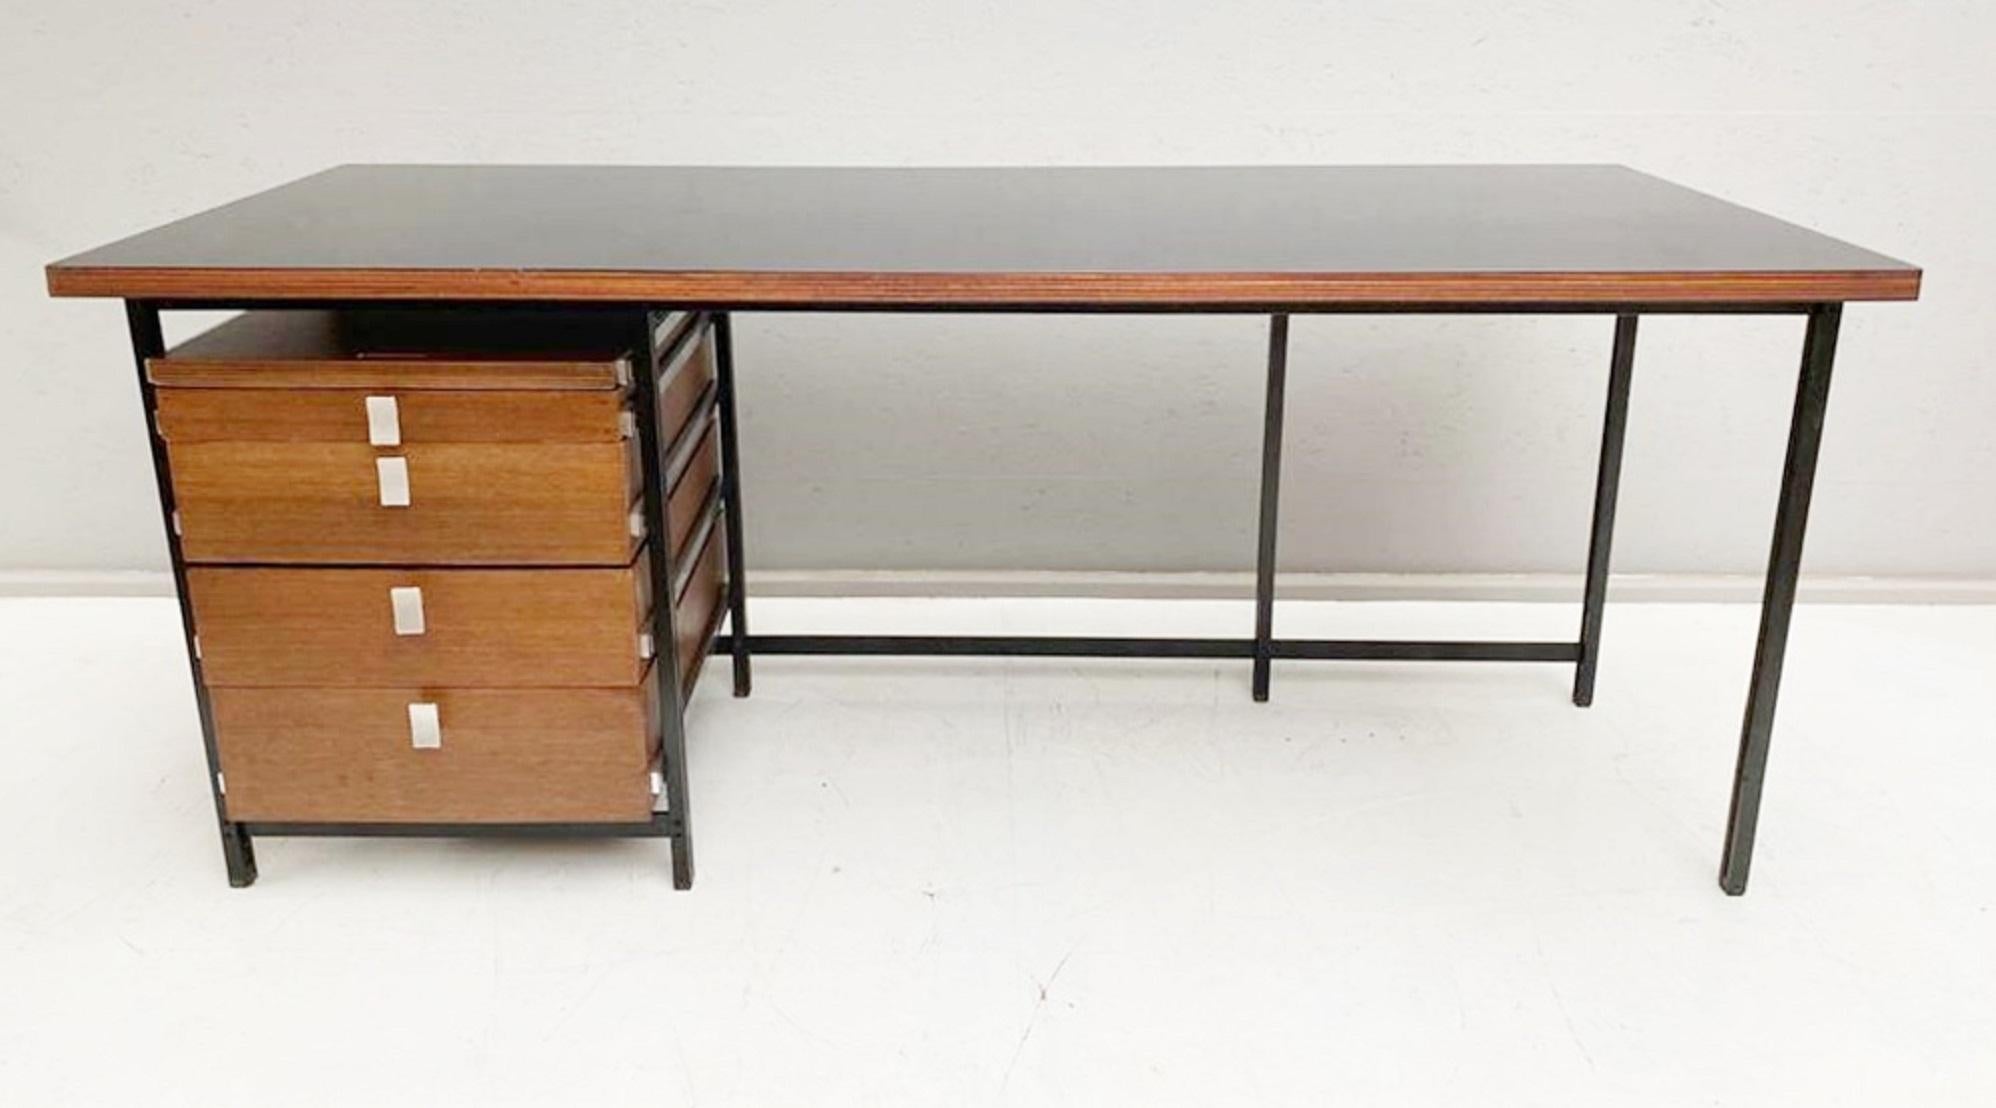 Desk by Jules Wabbes for Mobilier universel - Belgium 1960s.